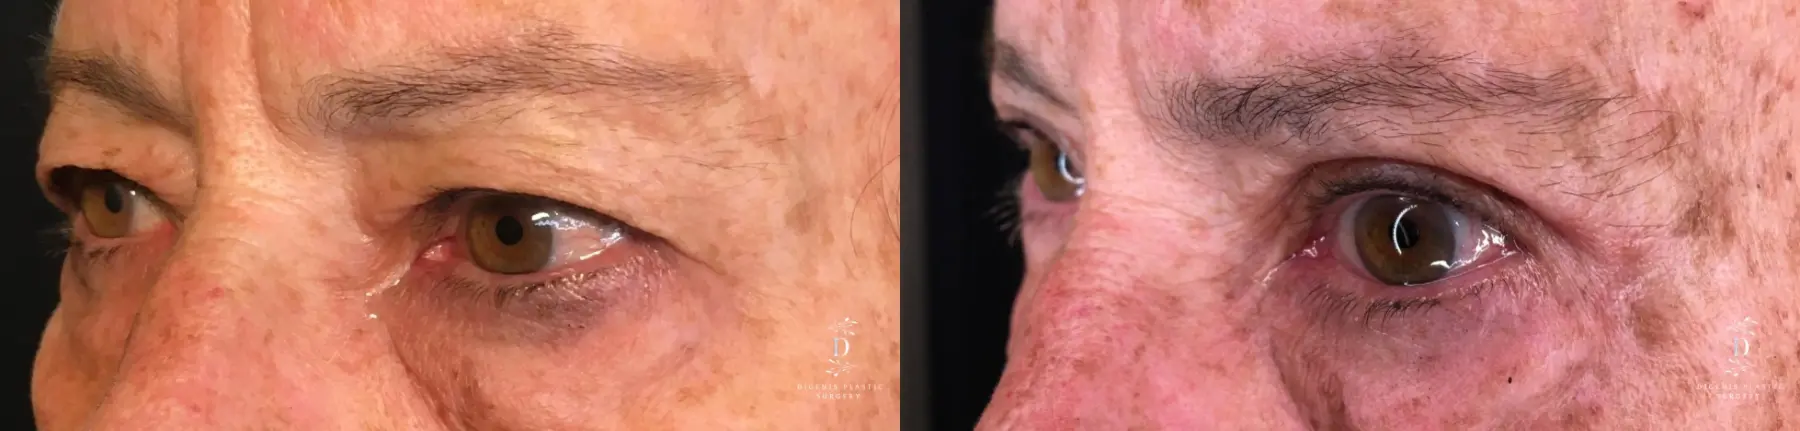 Eyelid Surgery: Patient 26 - Before and After 4